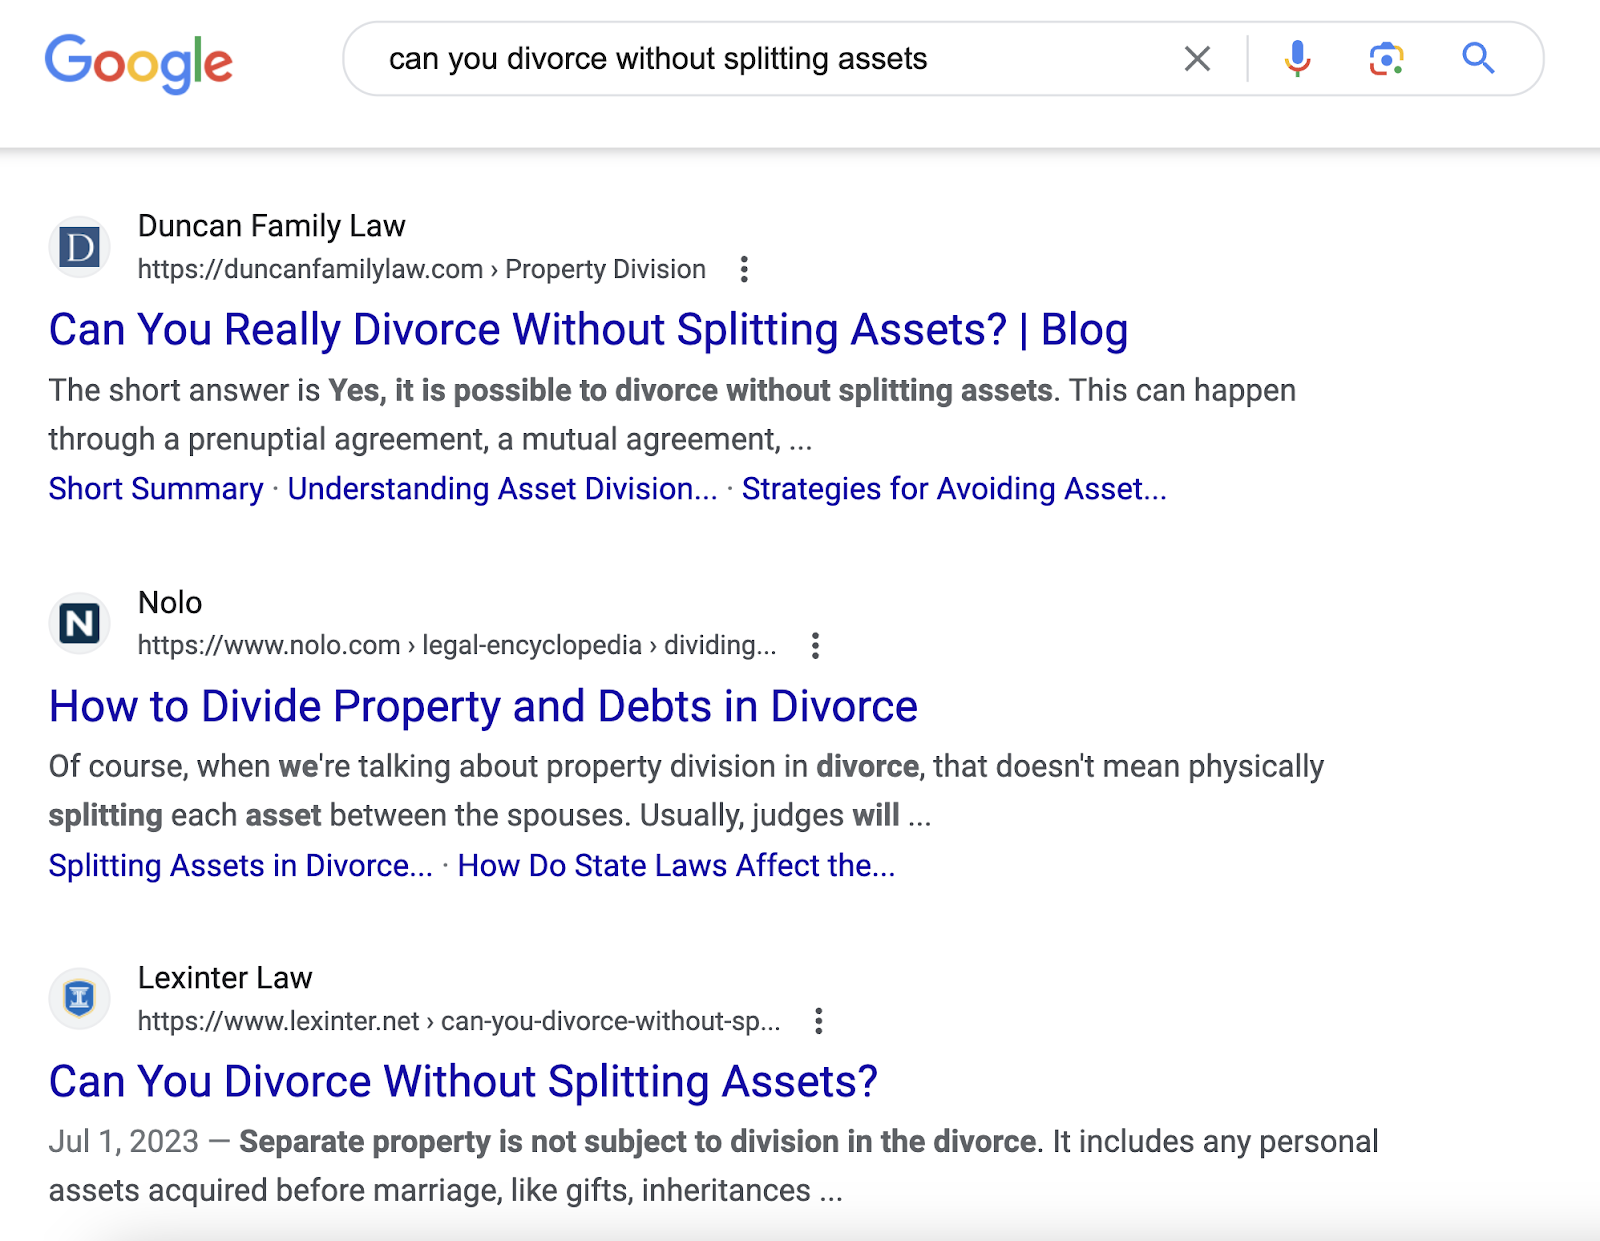 Google's SERP for “can you divorce without splitting assets” query